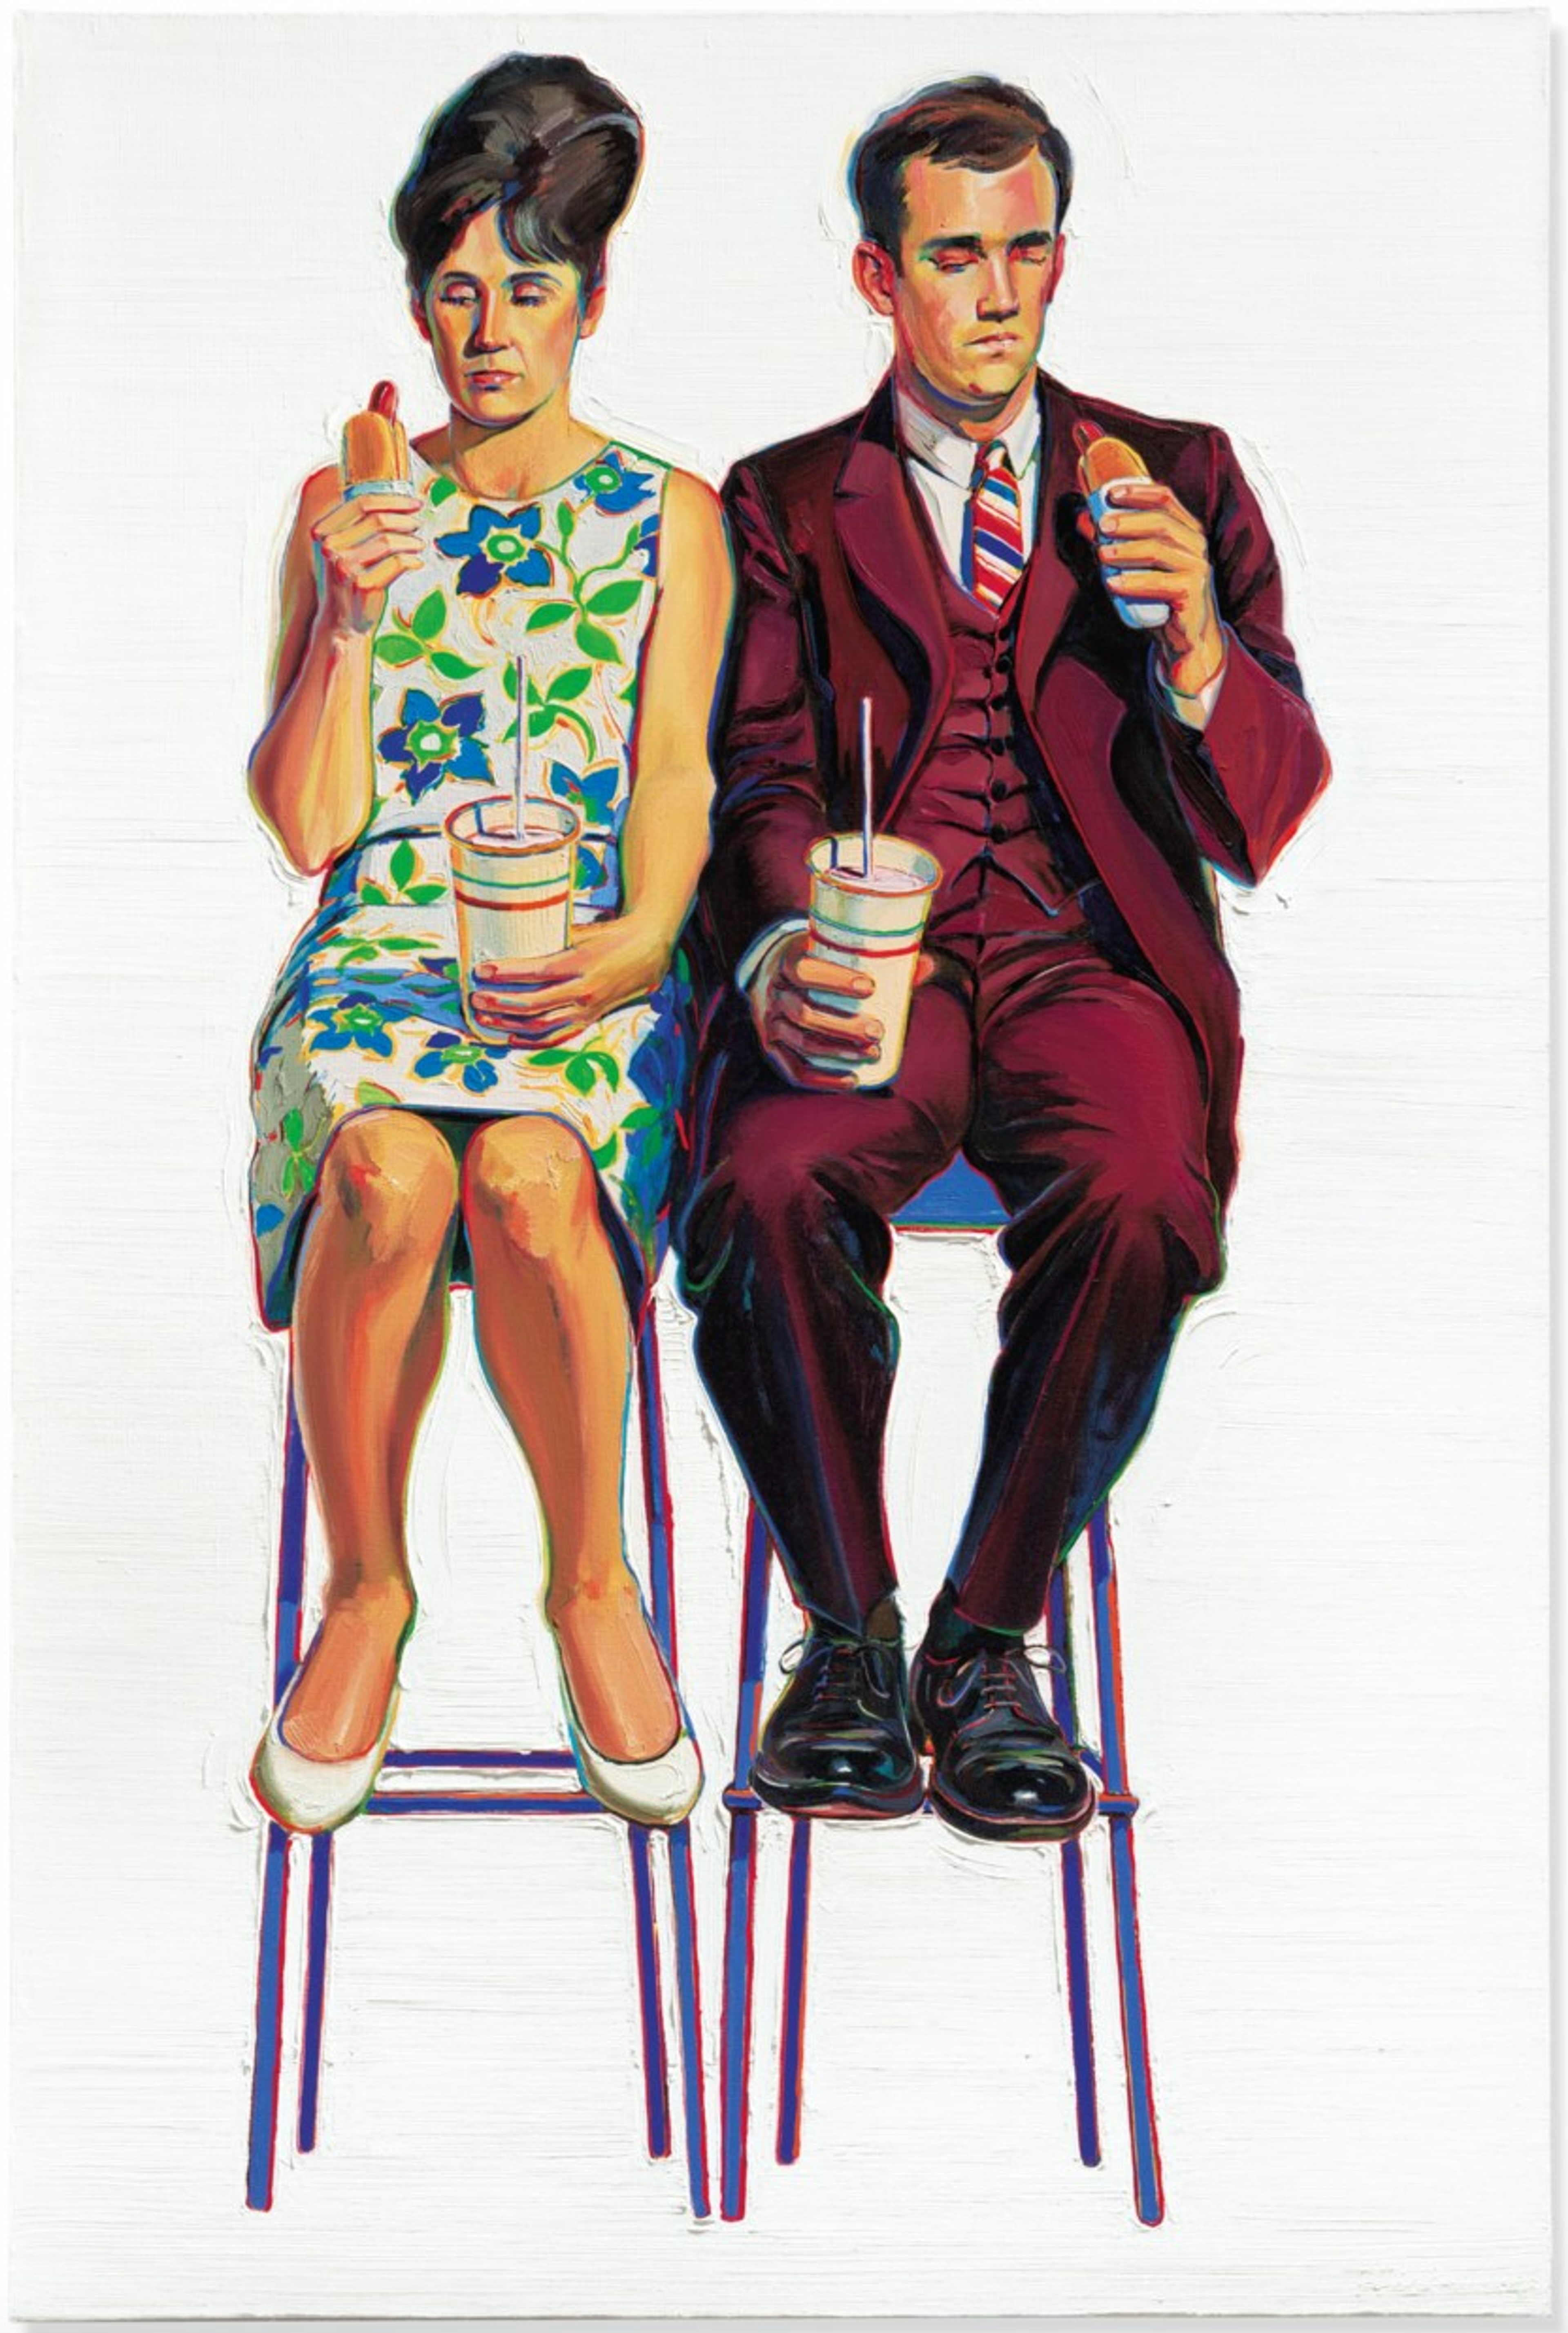 Eating Figures (Quick Snack) by Wayne Thiebaud - Christie's 